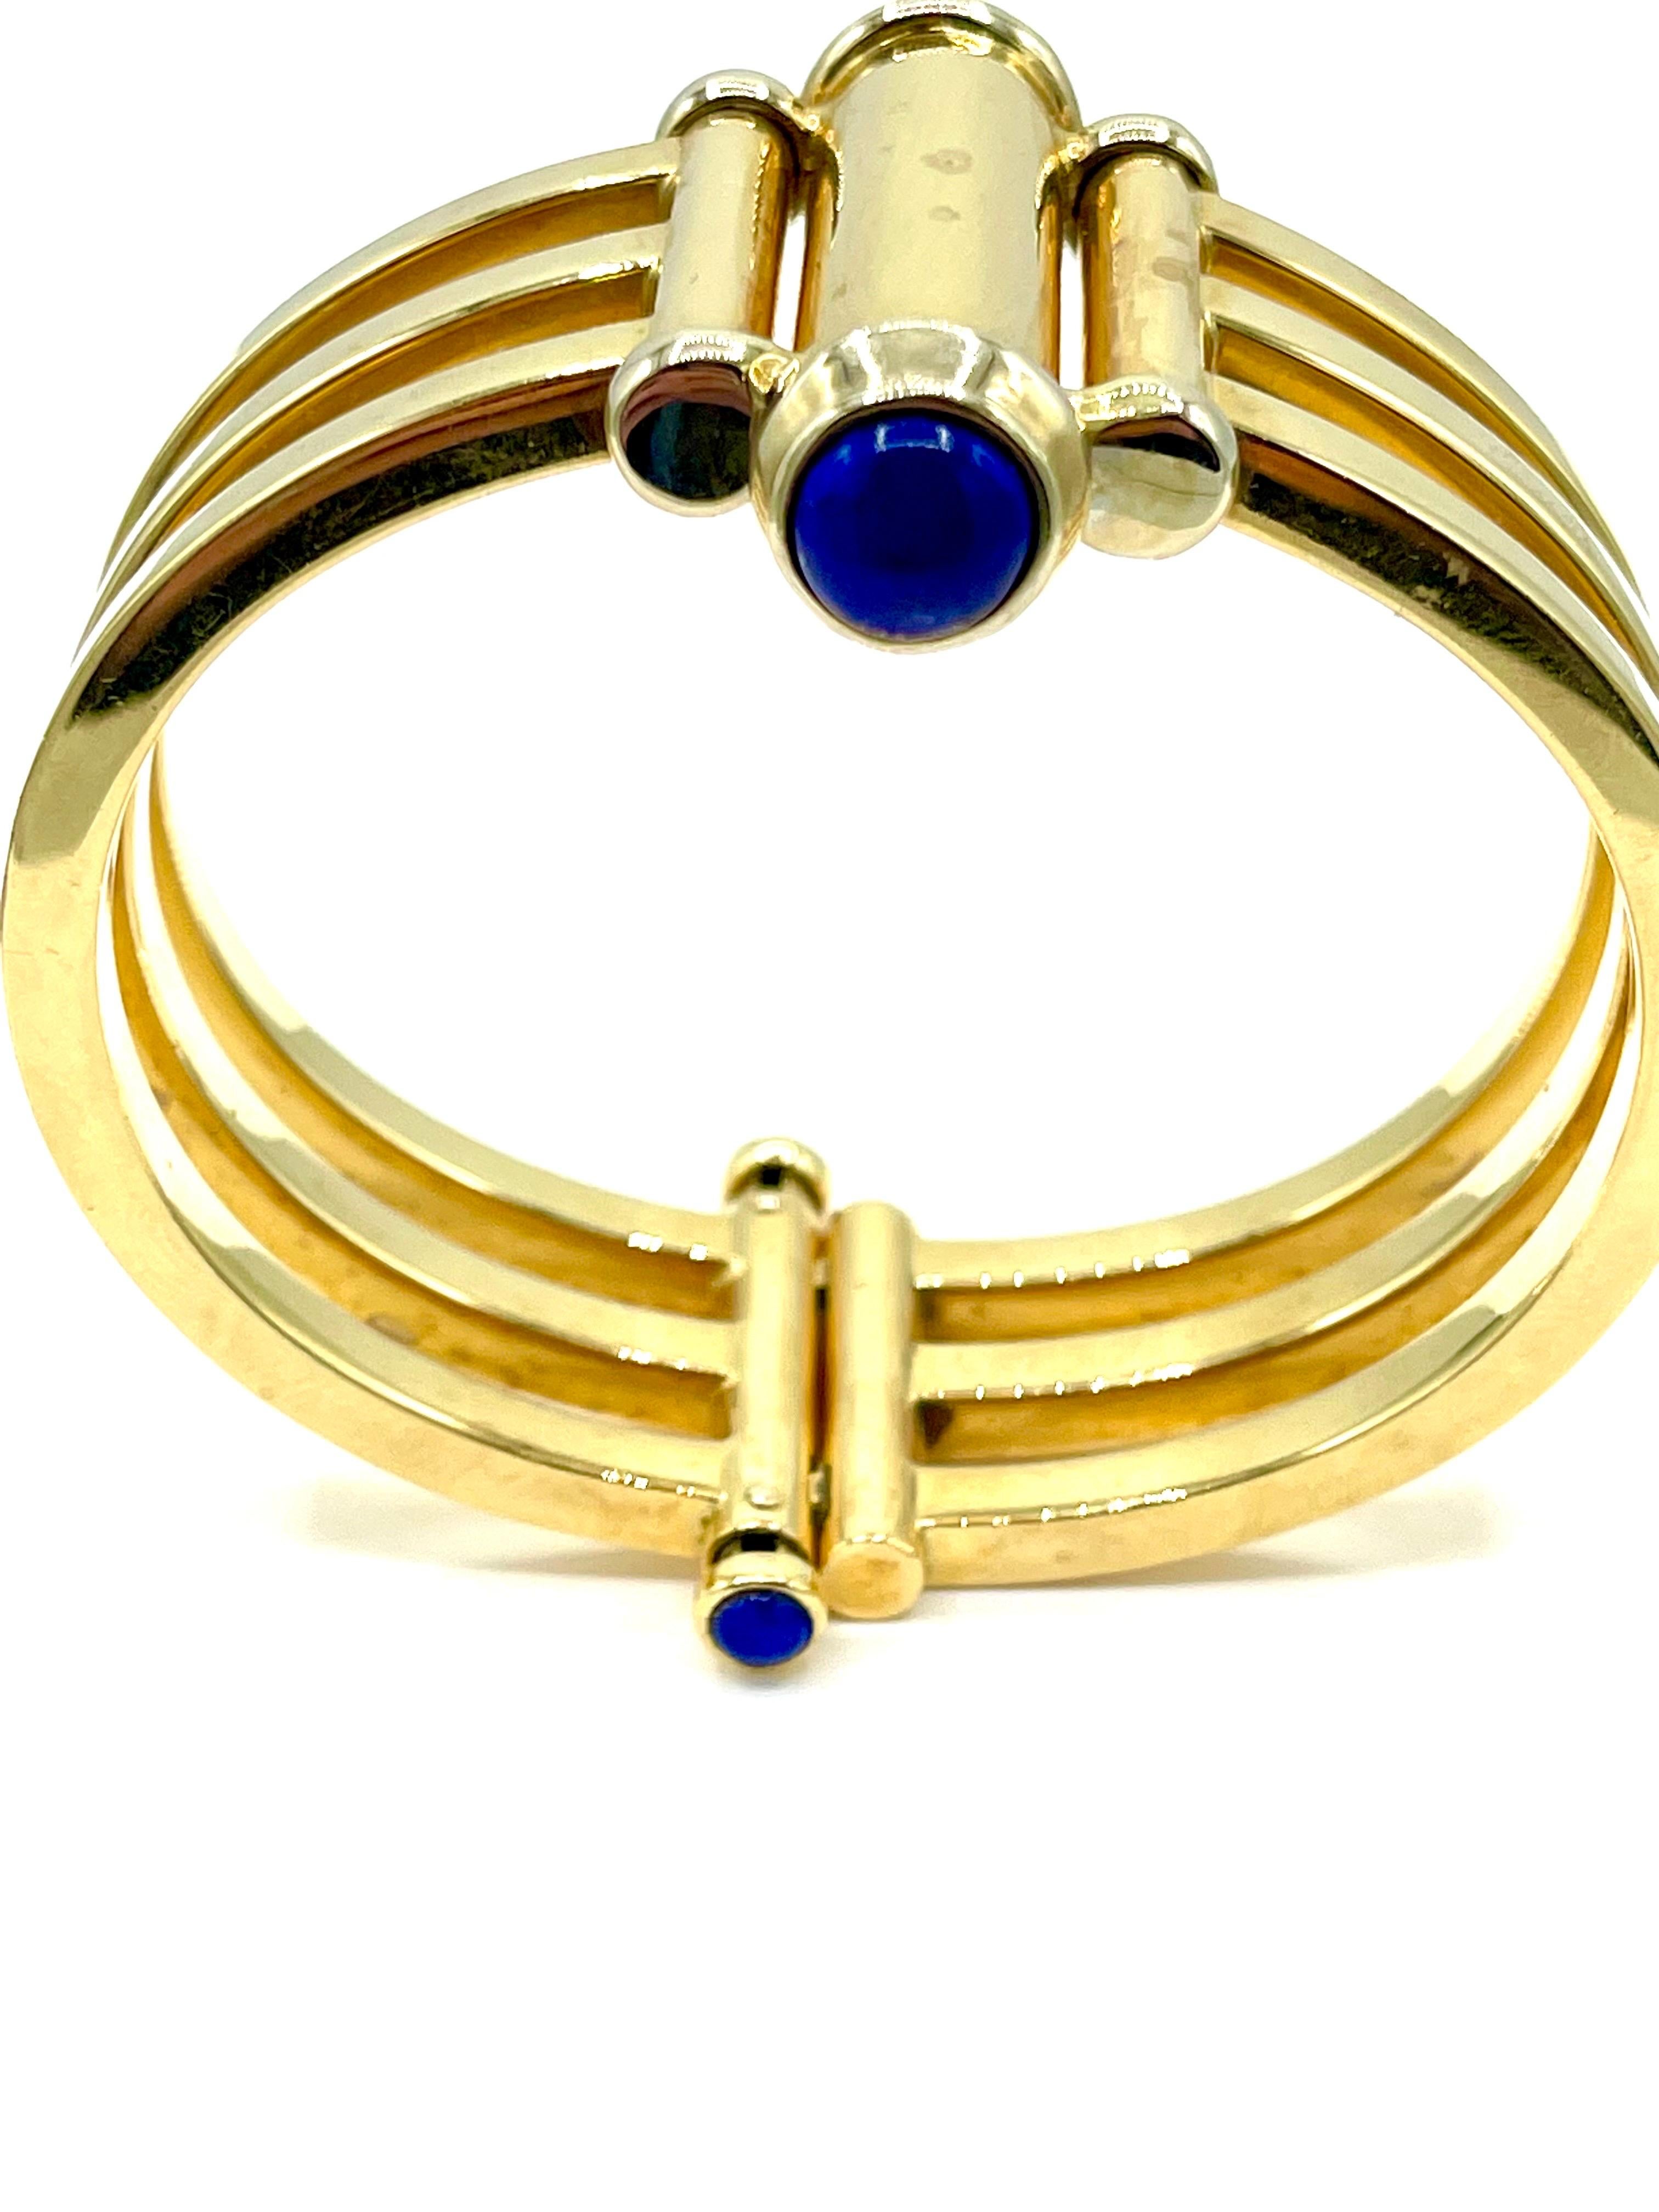 A bangle made for everyday wear!  The bangle bracelet features four cabochon cut Lapis Lazuli pieces bezel set in 18k yellow gold.  The bracelet is made with three a bar station center that is hinged to make the bracelet very easy to slip on and